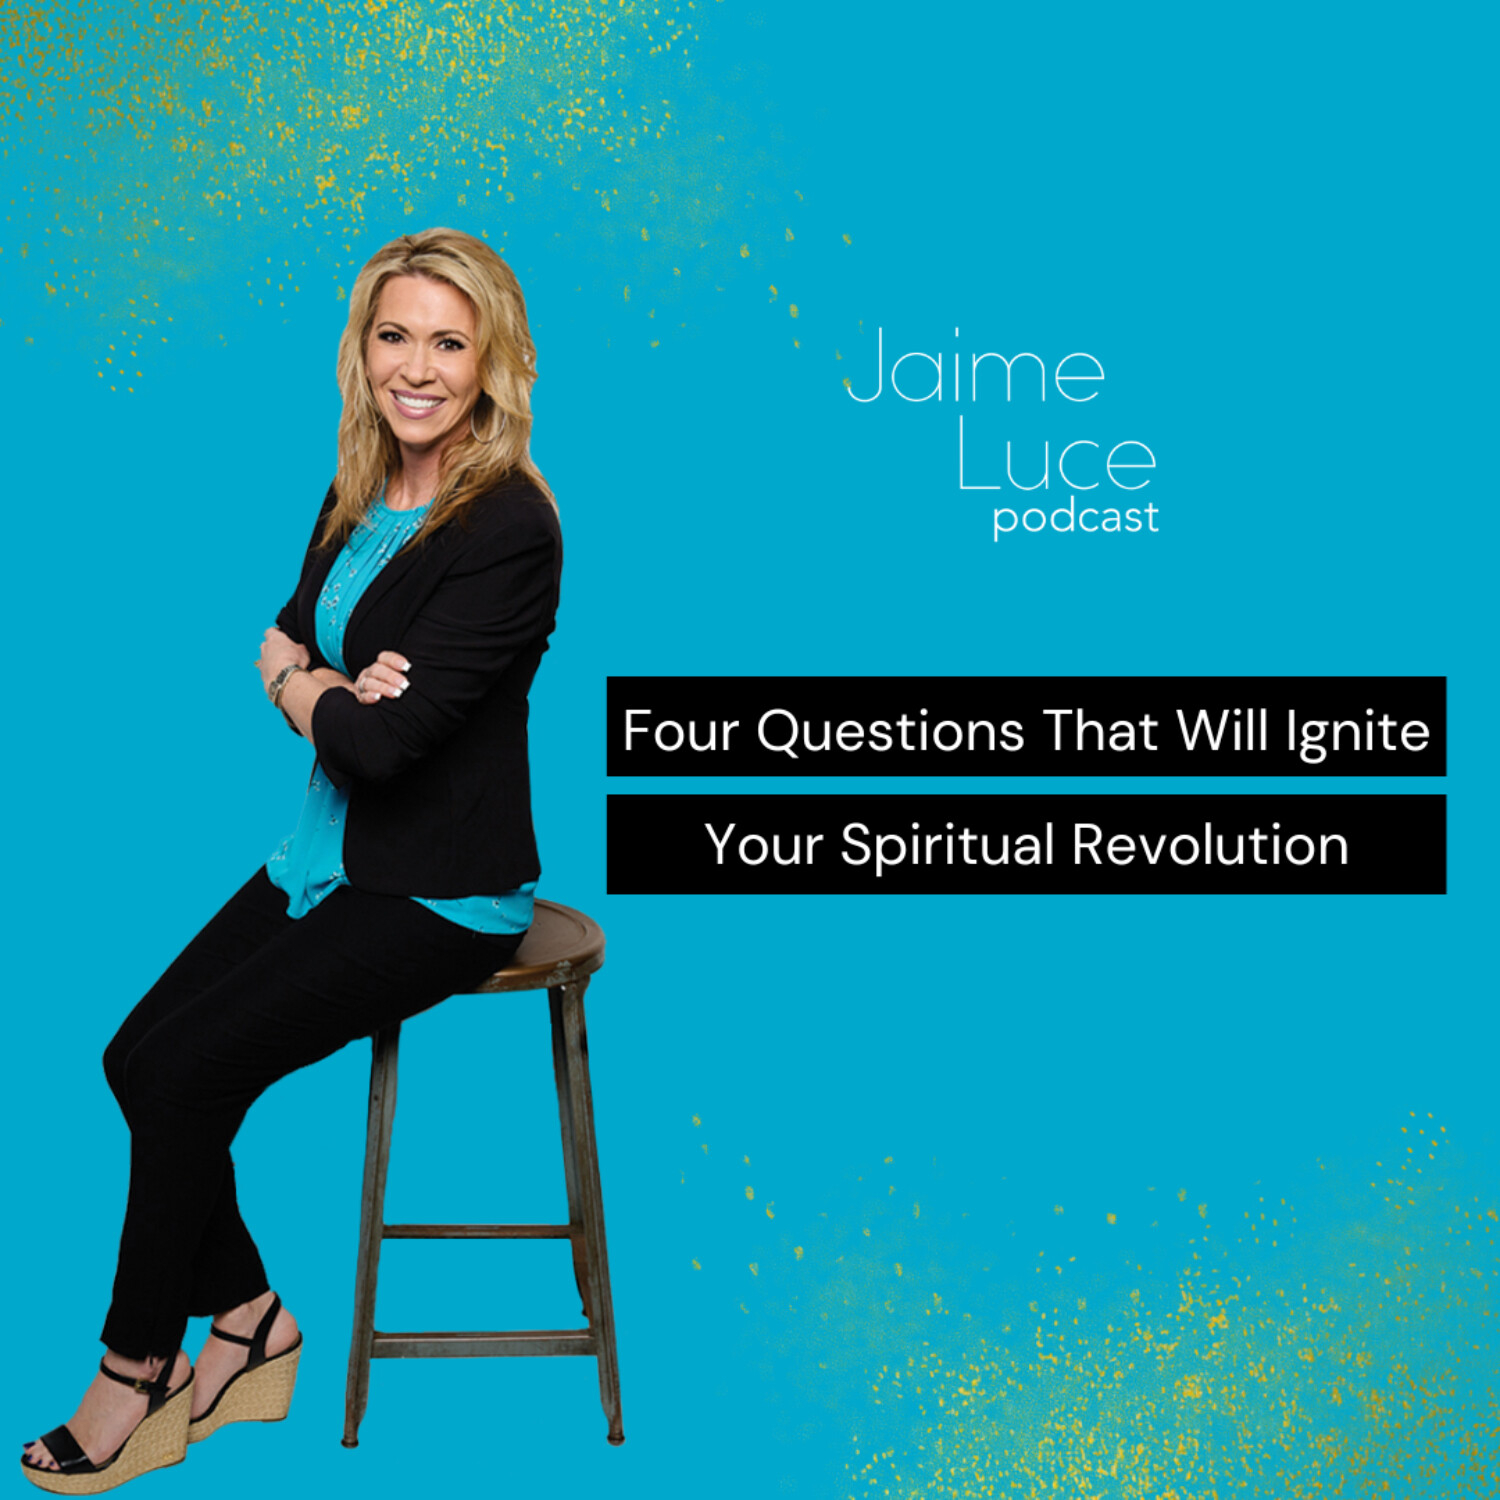 Four Questions That Will Ignite Your Spiritual Revolution